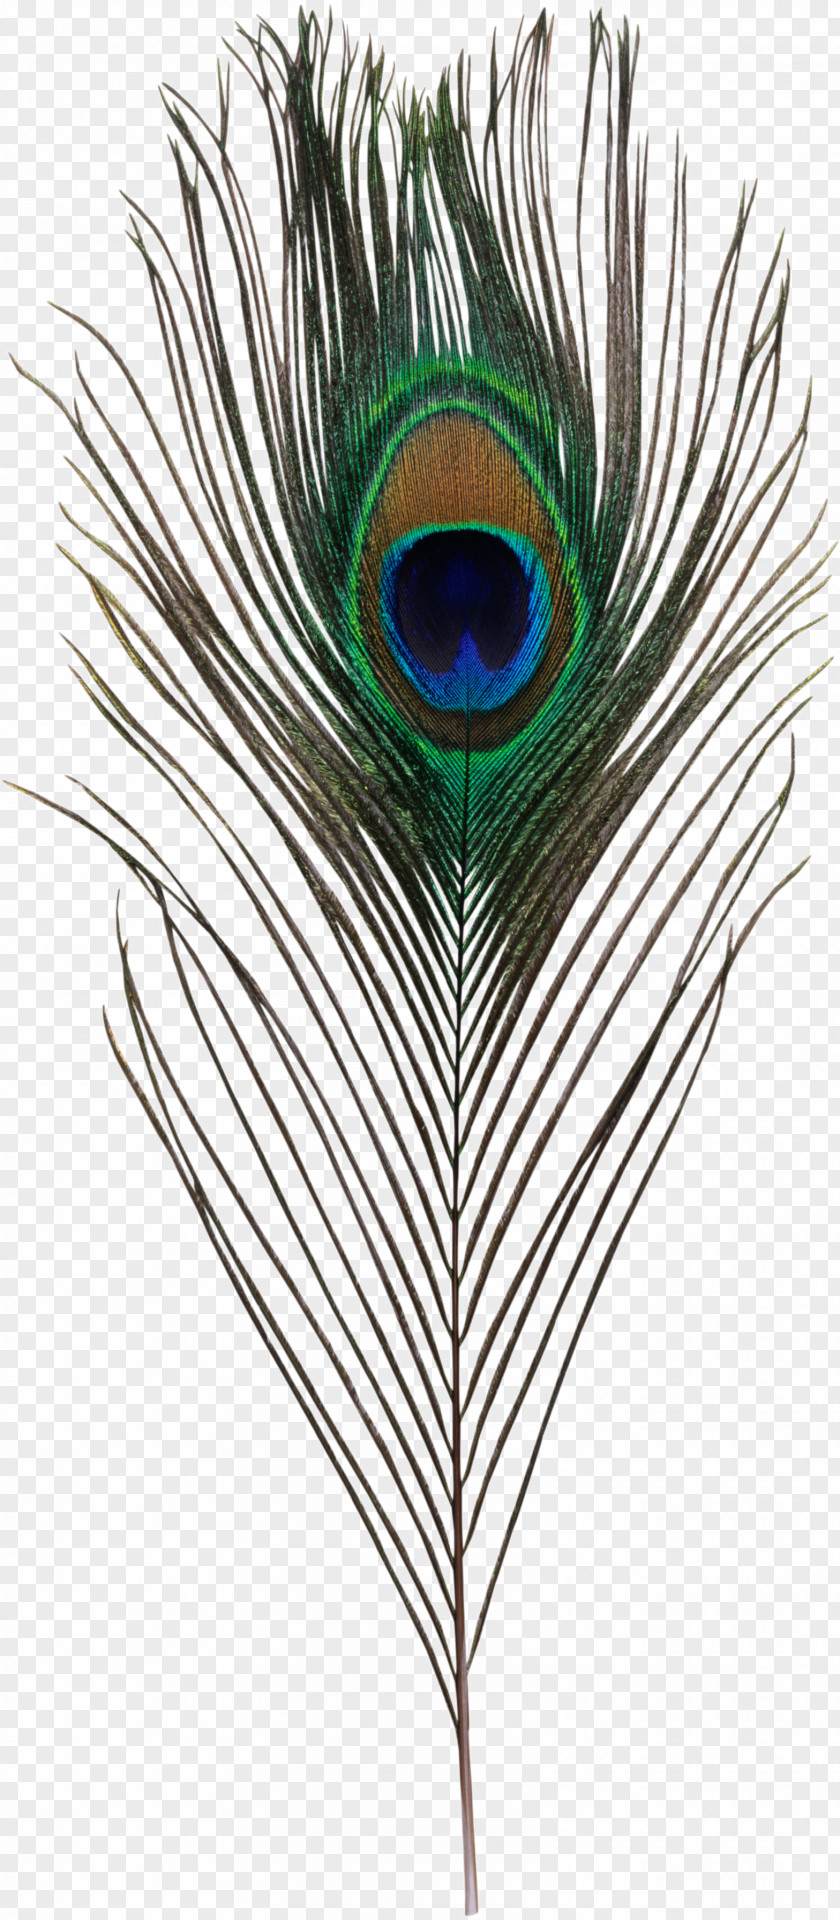 Peacock Feather Bird Asiatic Peafowl Simple Eye In Invertebrates PNG